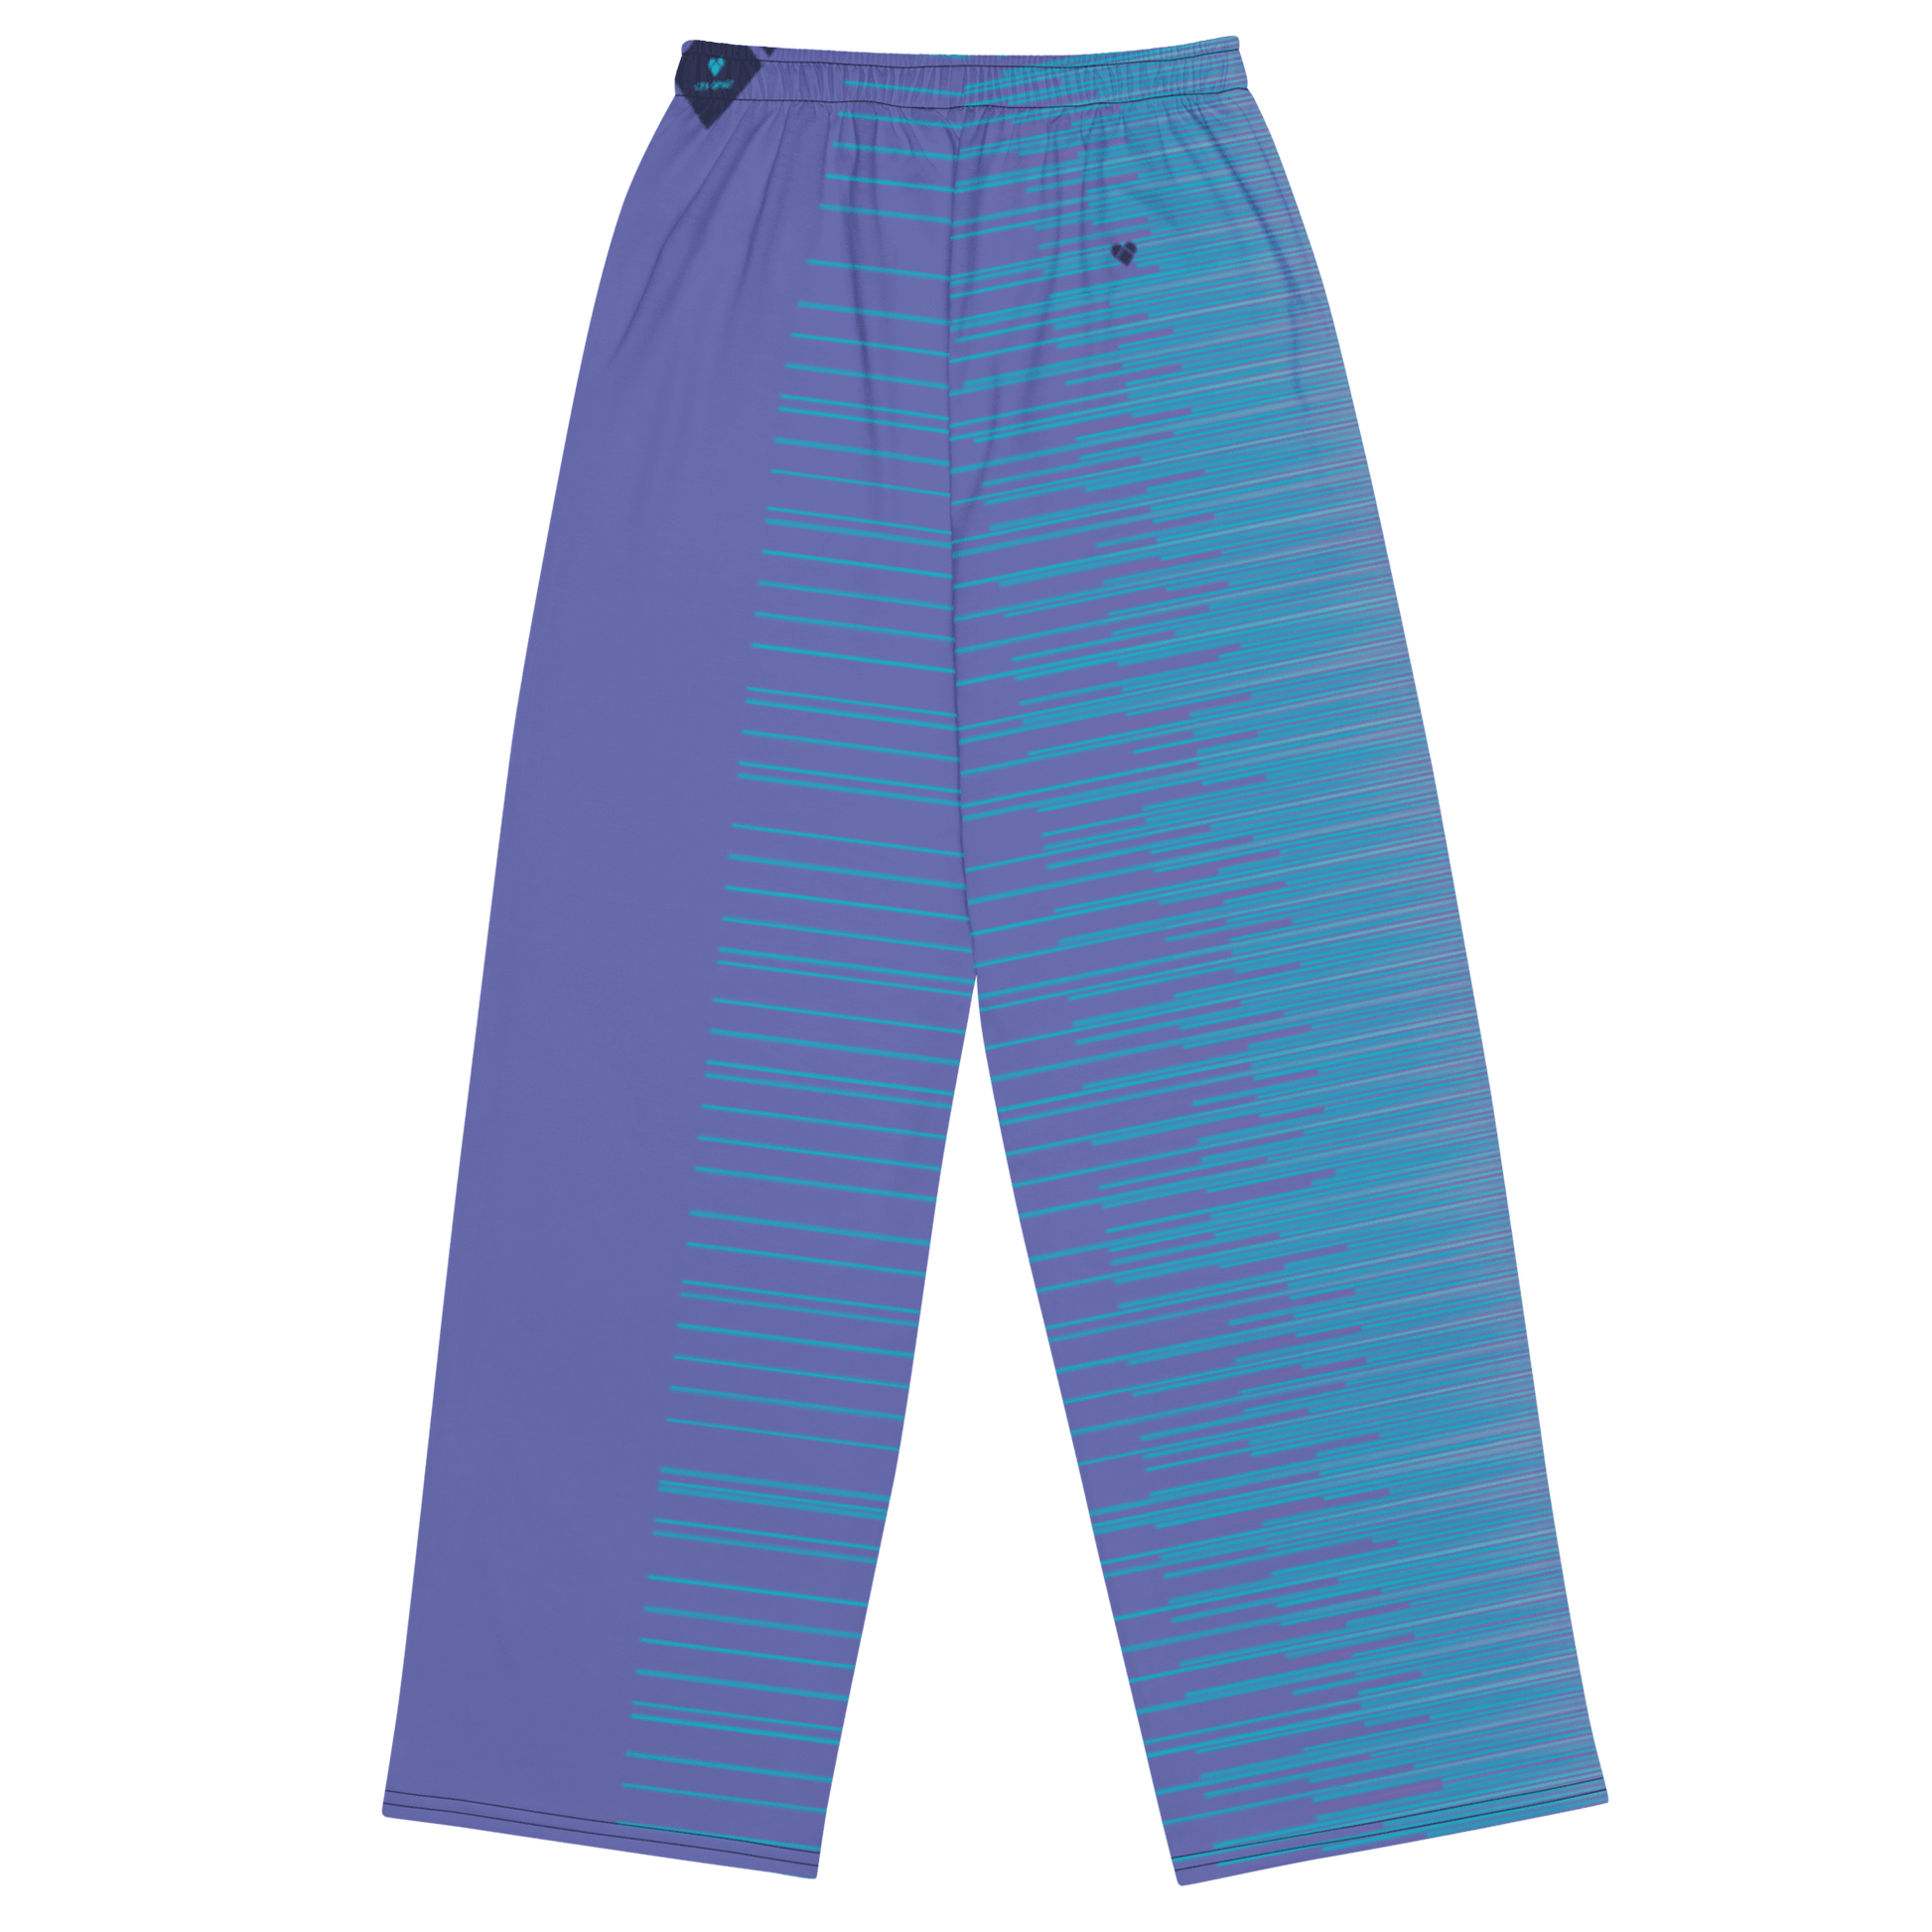 Genderless attire, Periwinkle Stripes Dual Pants, designed for comfort and style